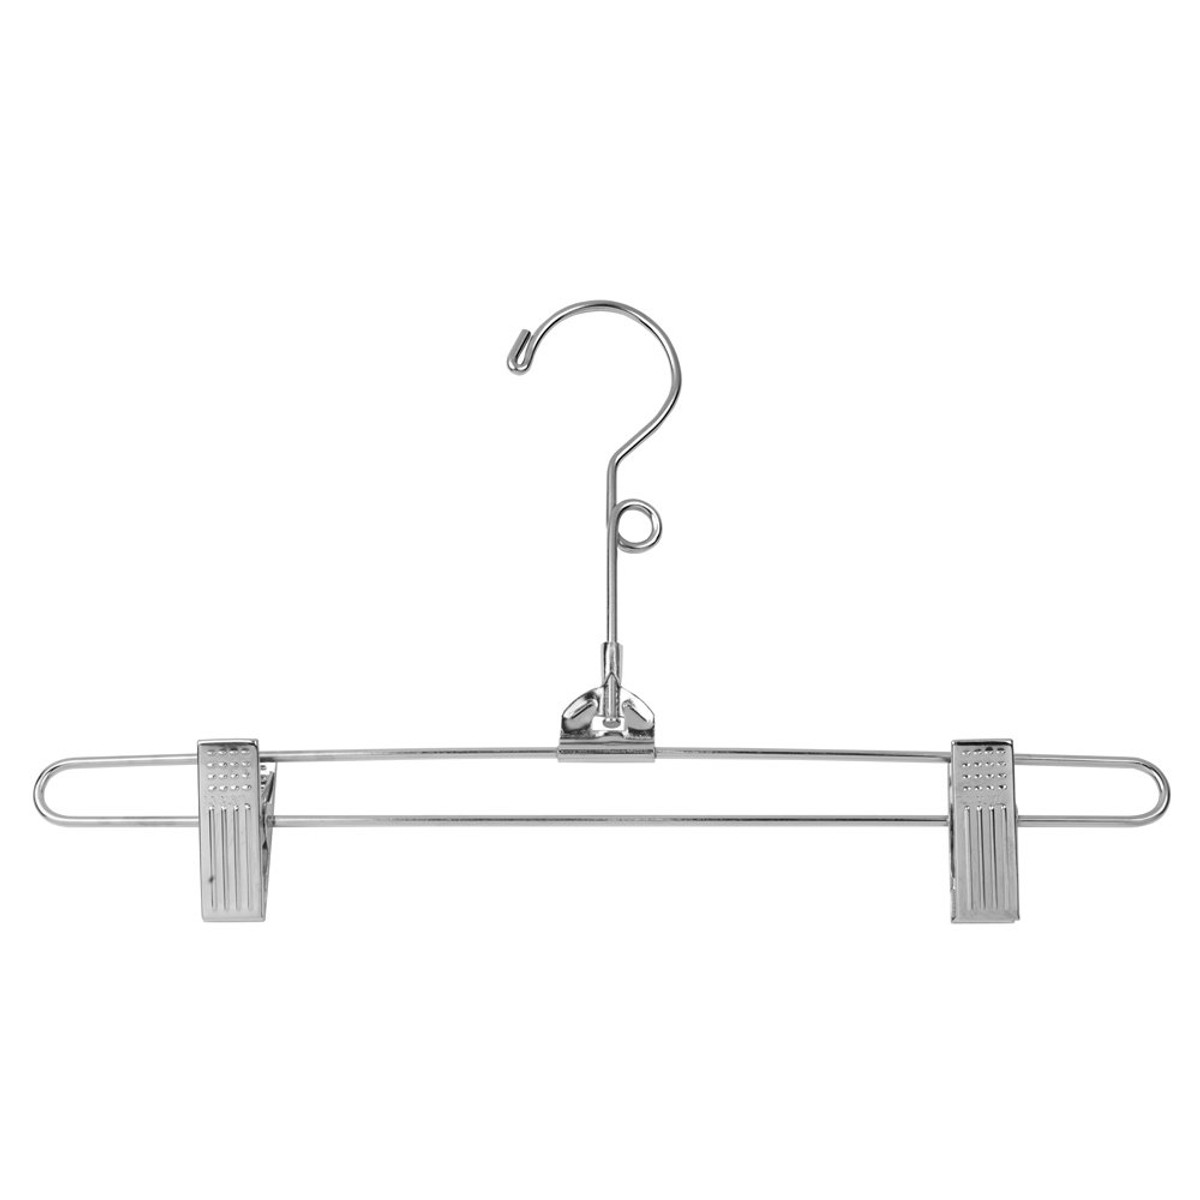 14 Metal Clothing Hangers With Loop Hook And Twist Joint